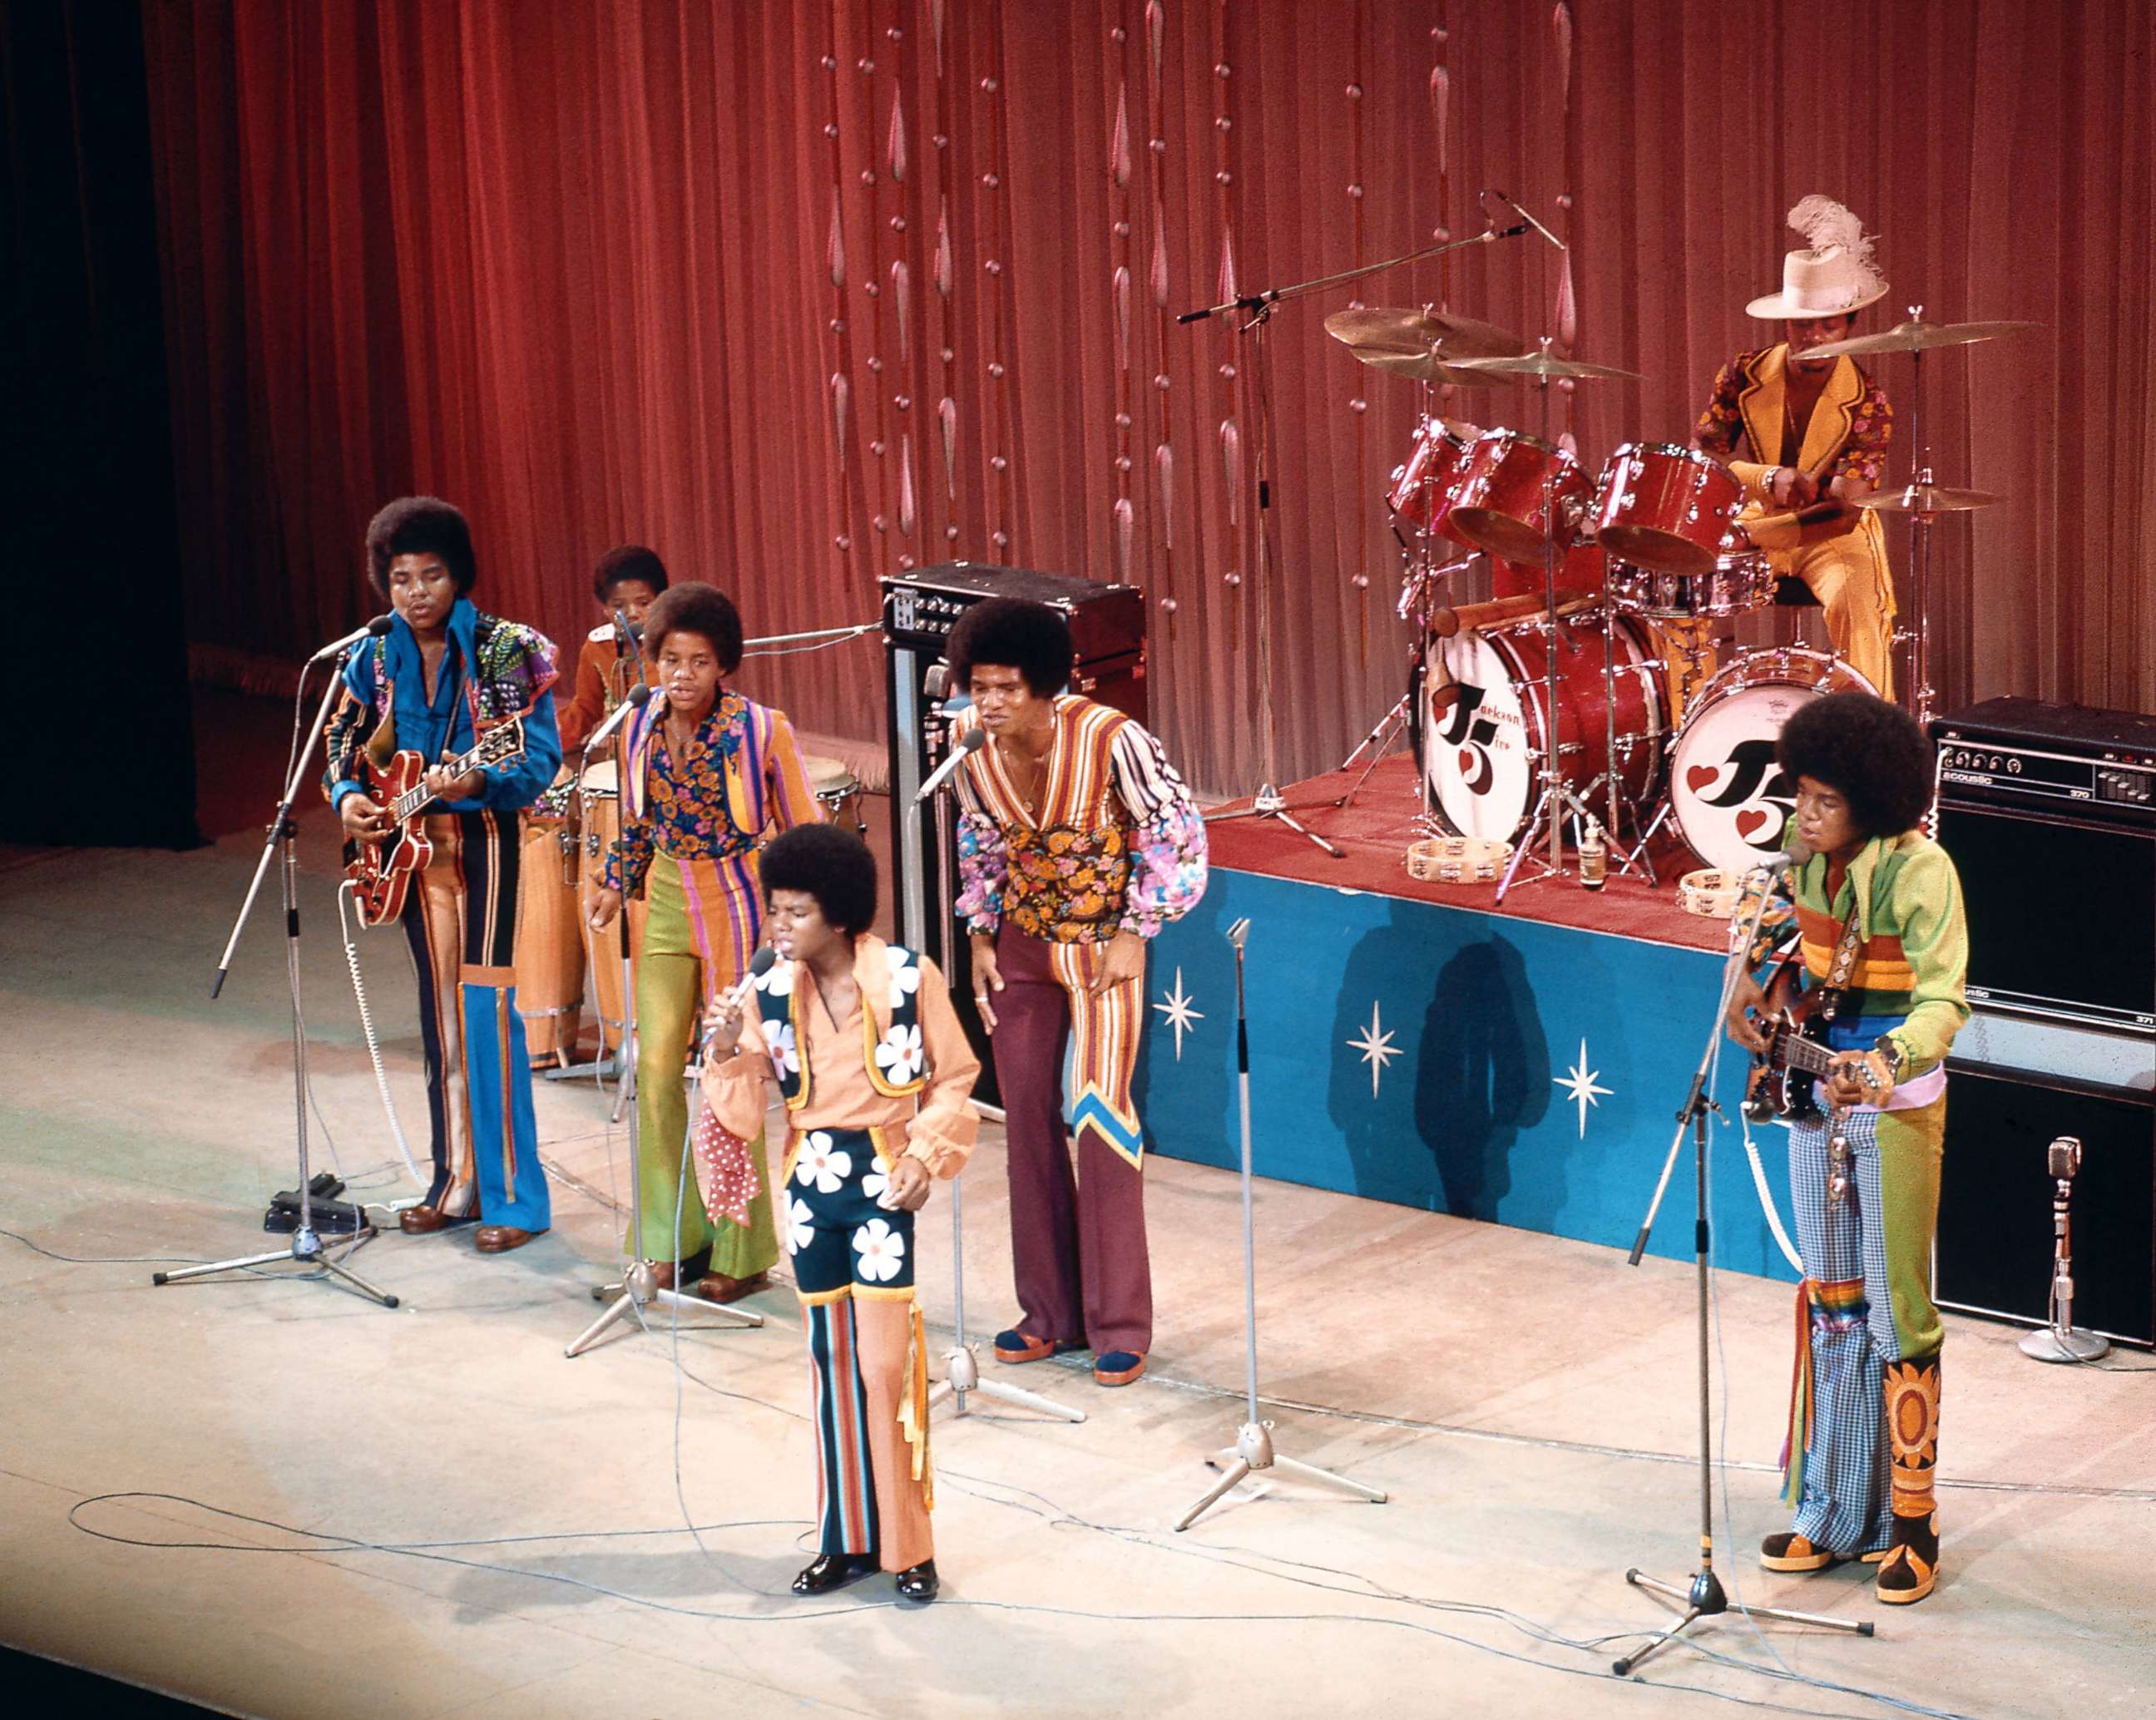 PHOTO: The Jackson 5 perform on stage at the Royal Variety Performance L-R Tito , Marlon, Michael (front) , Jackie and Jermaine Jackson, Nov. 1, 1972, in London.